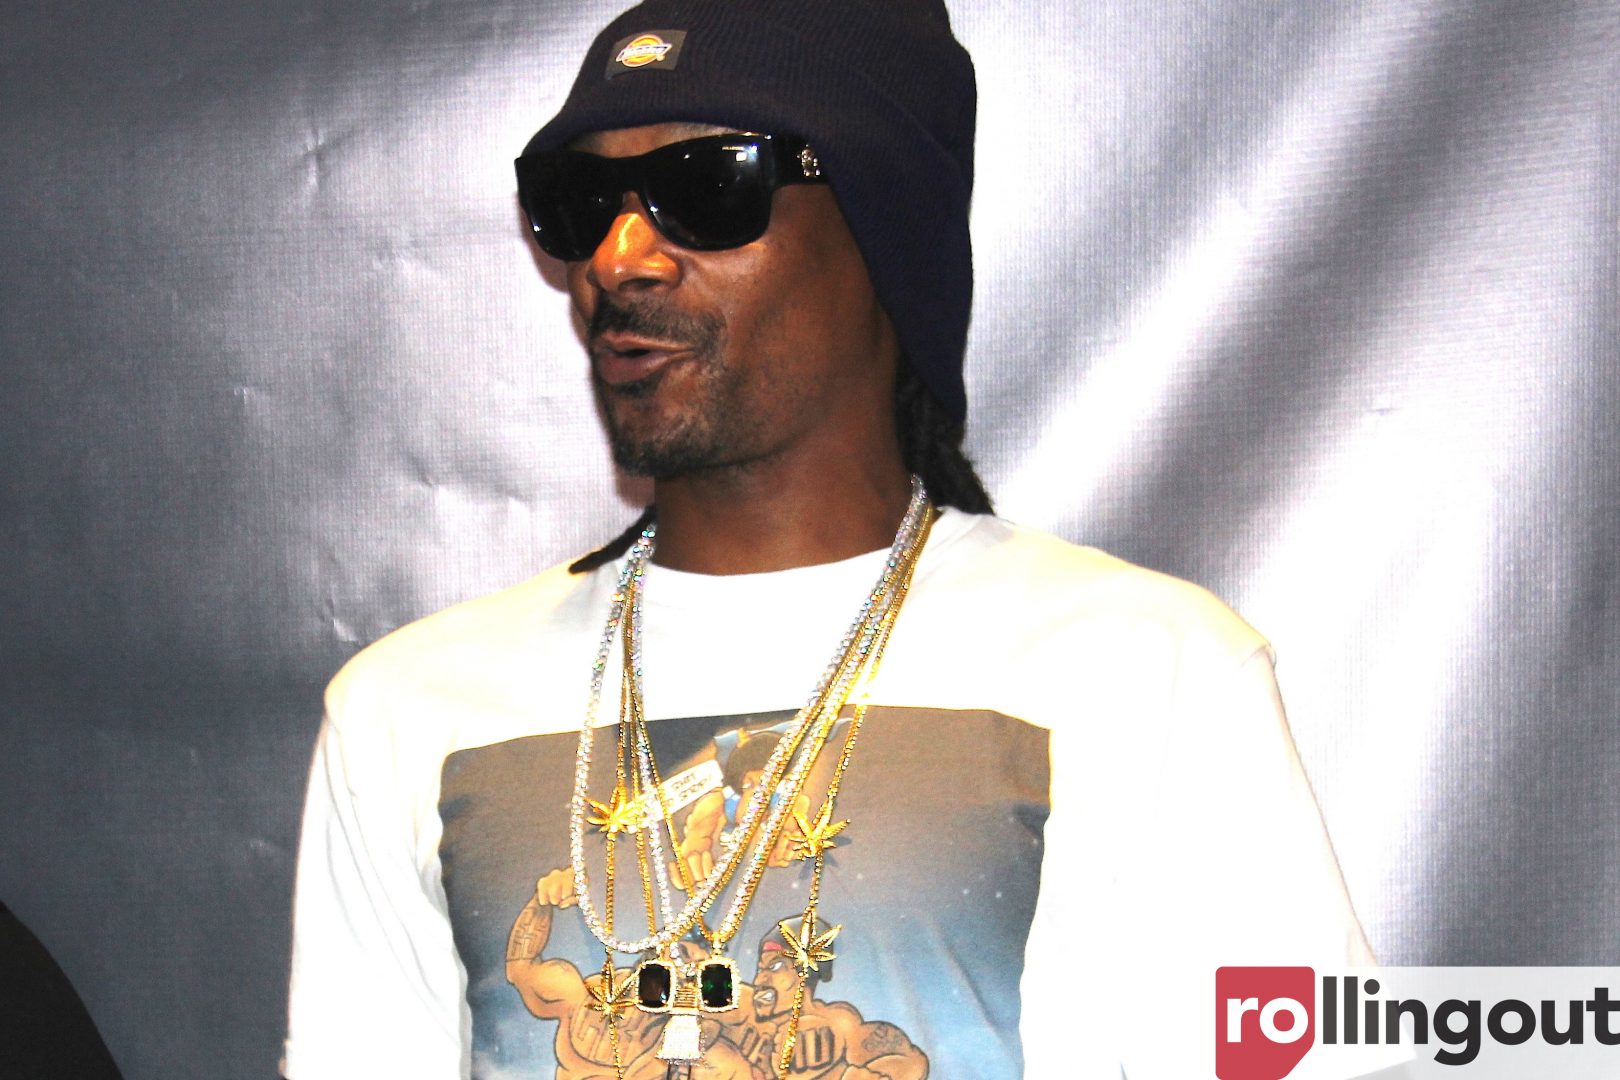 Snoop Dogg says the NFL used to recruit players from HBCU talent pool (video)